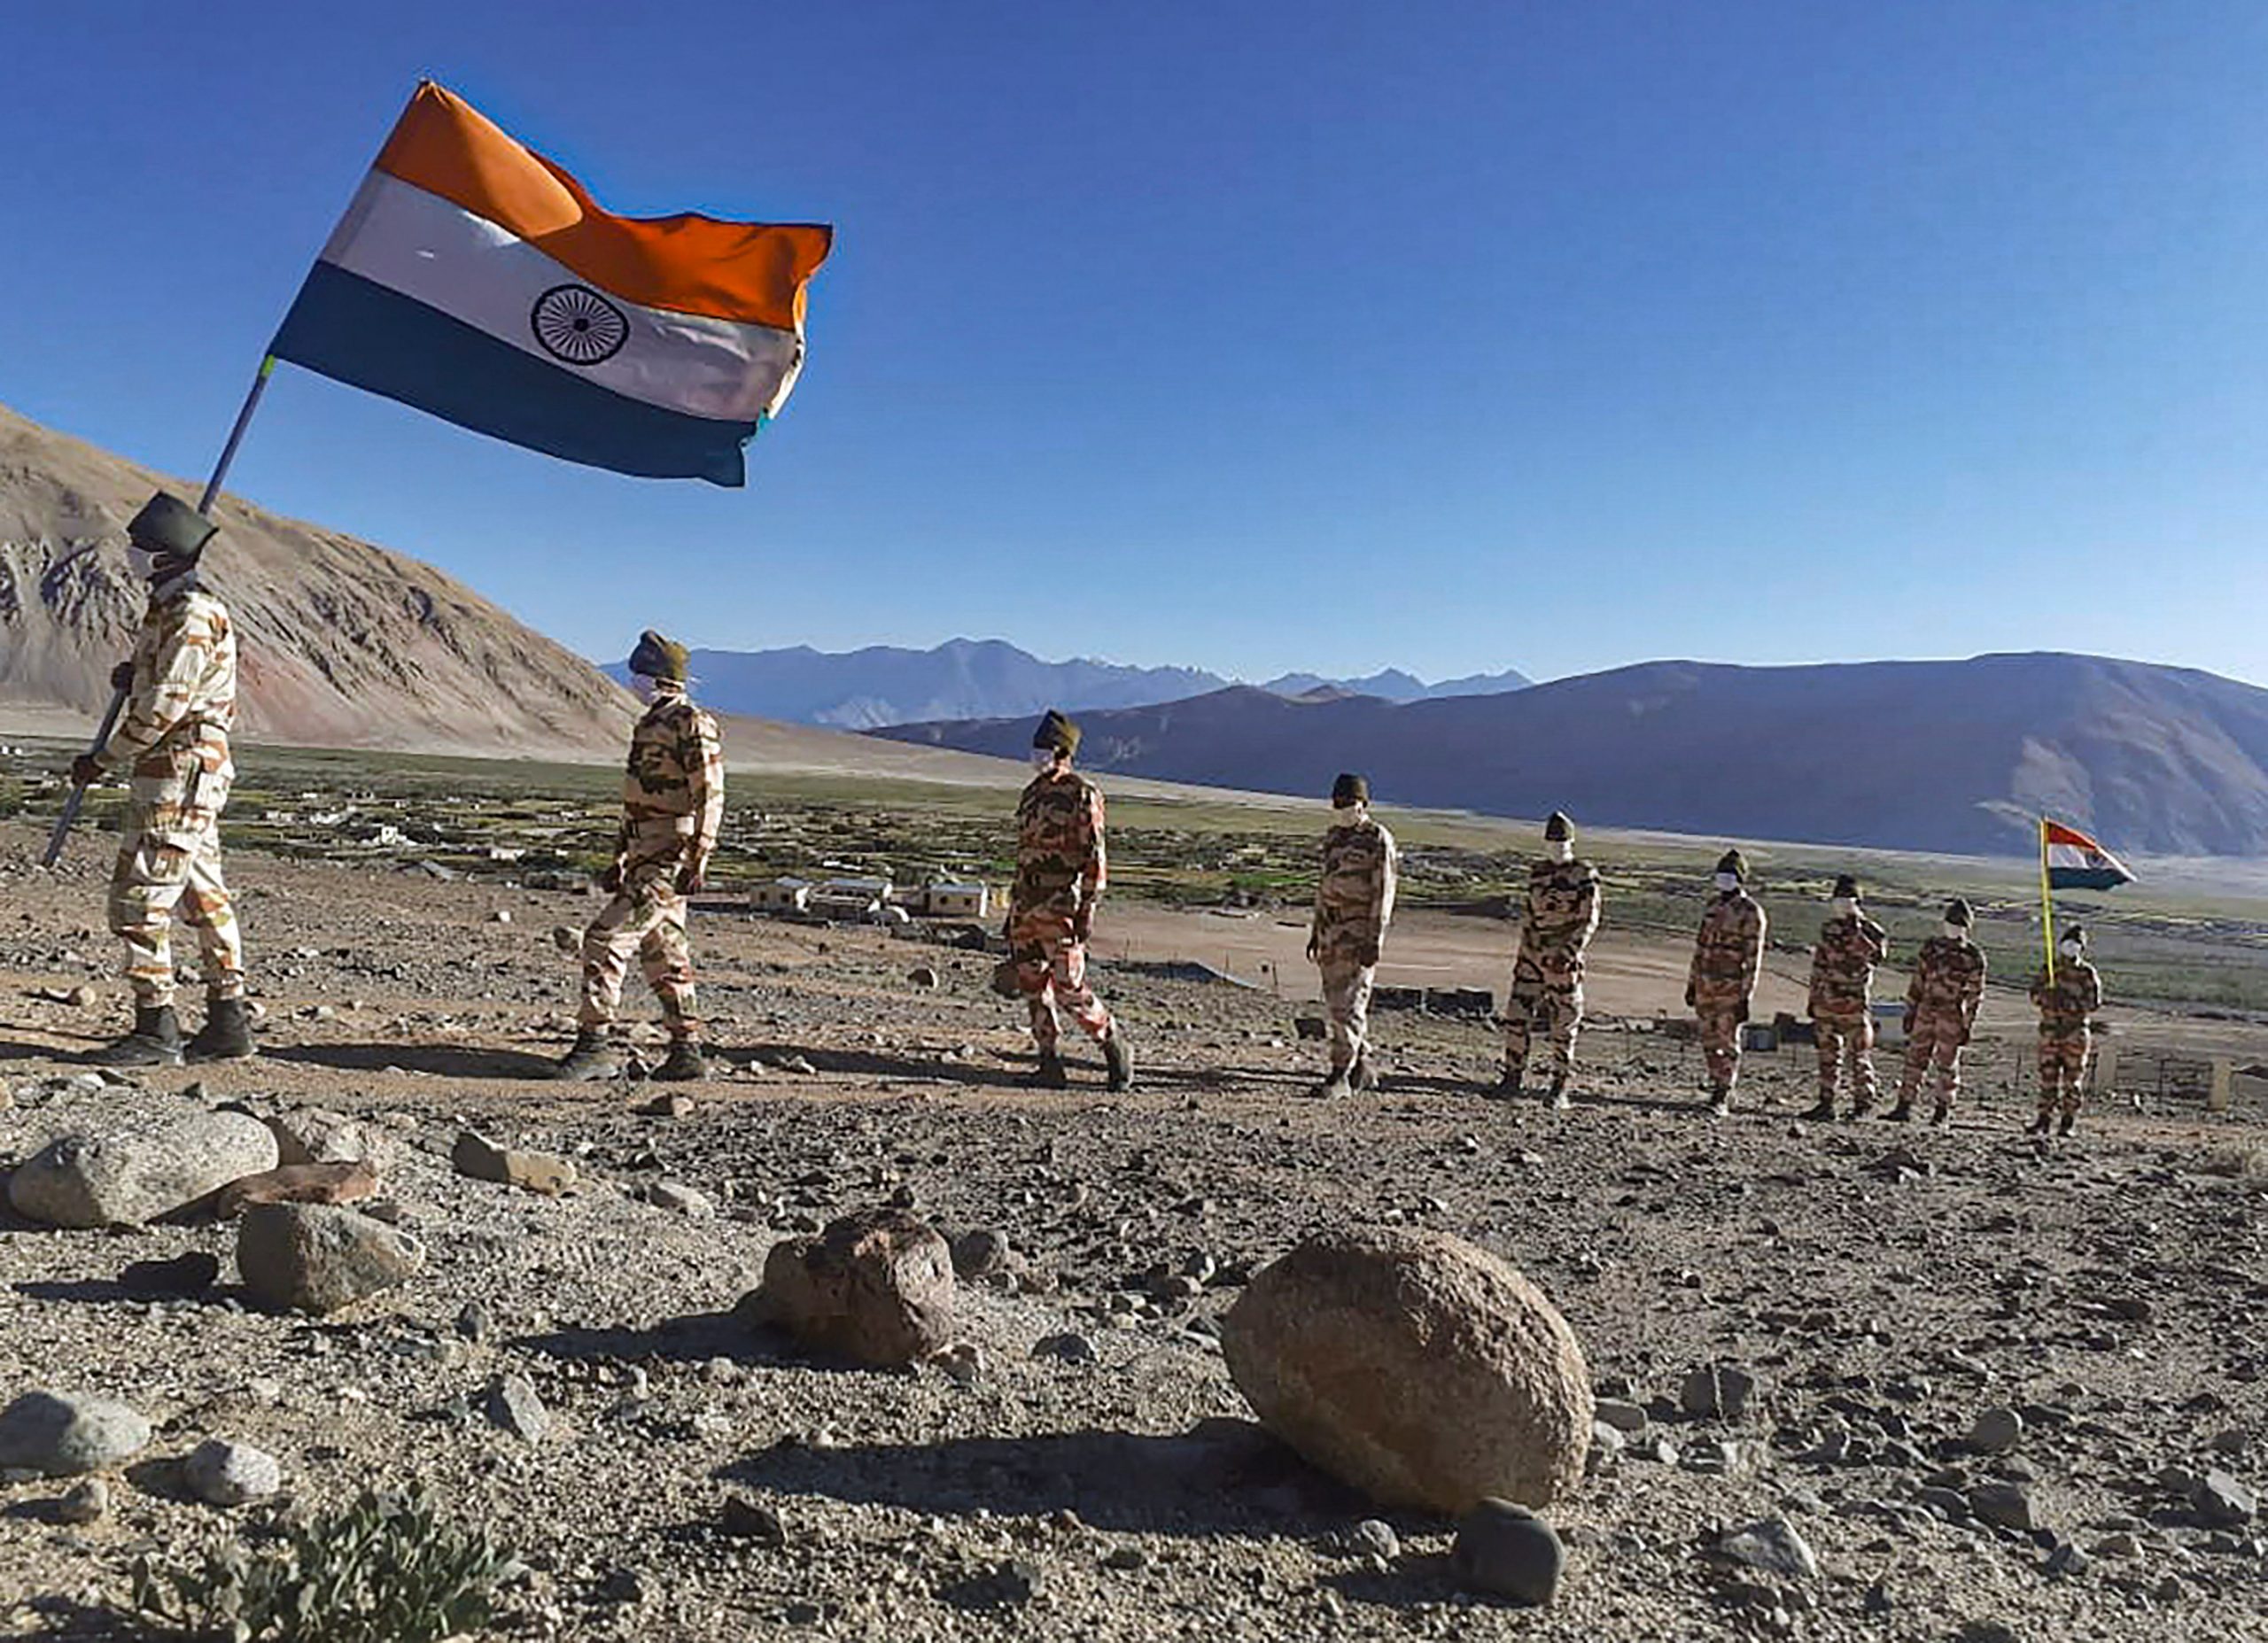 China demands complete withdrawal of Indian troops from Eastern Ladakh: Report